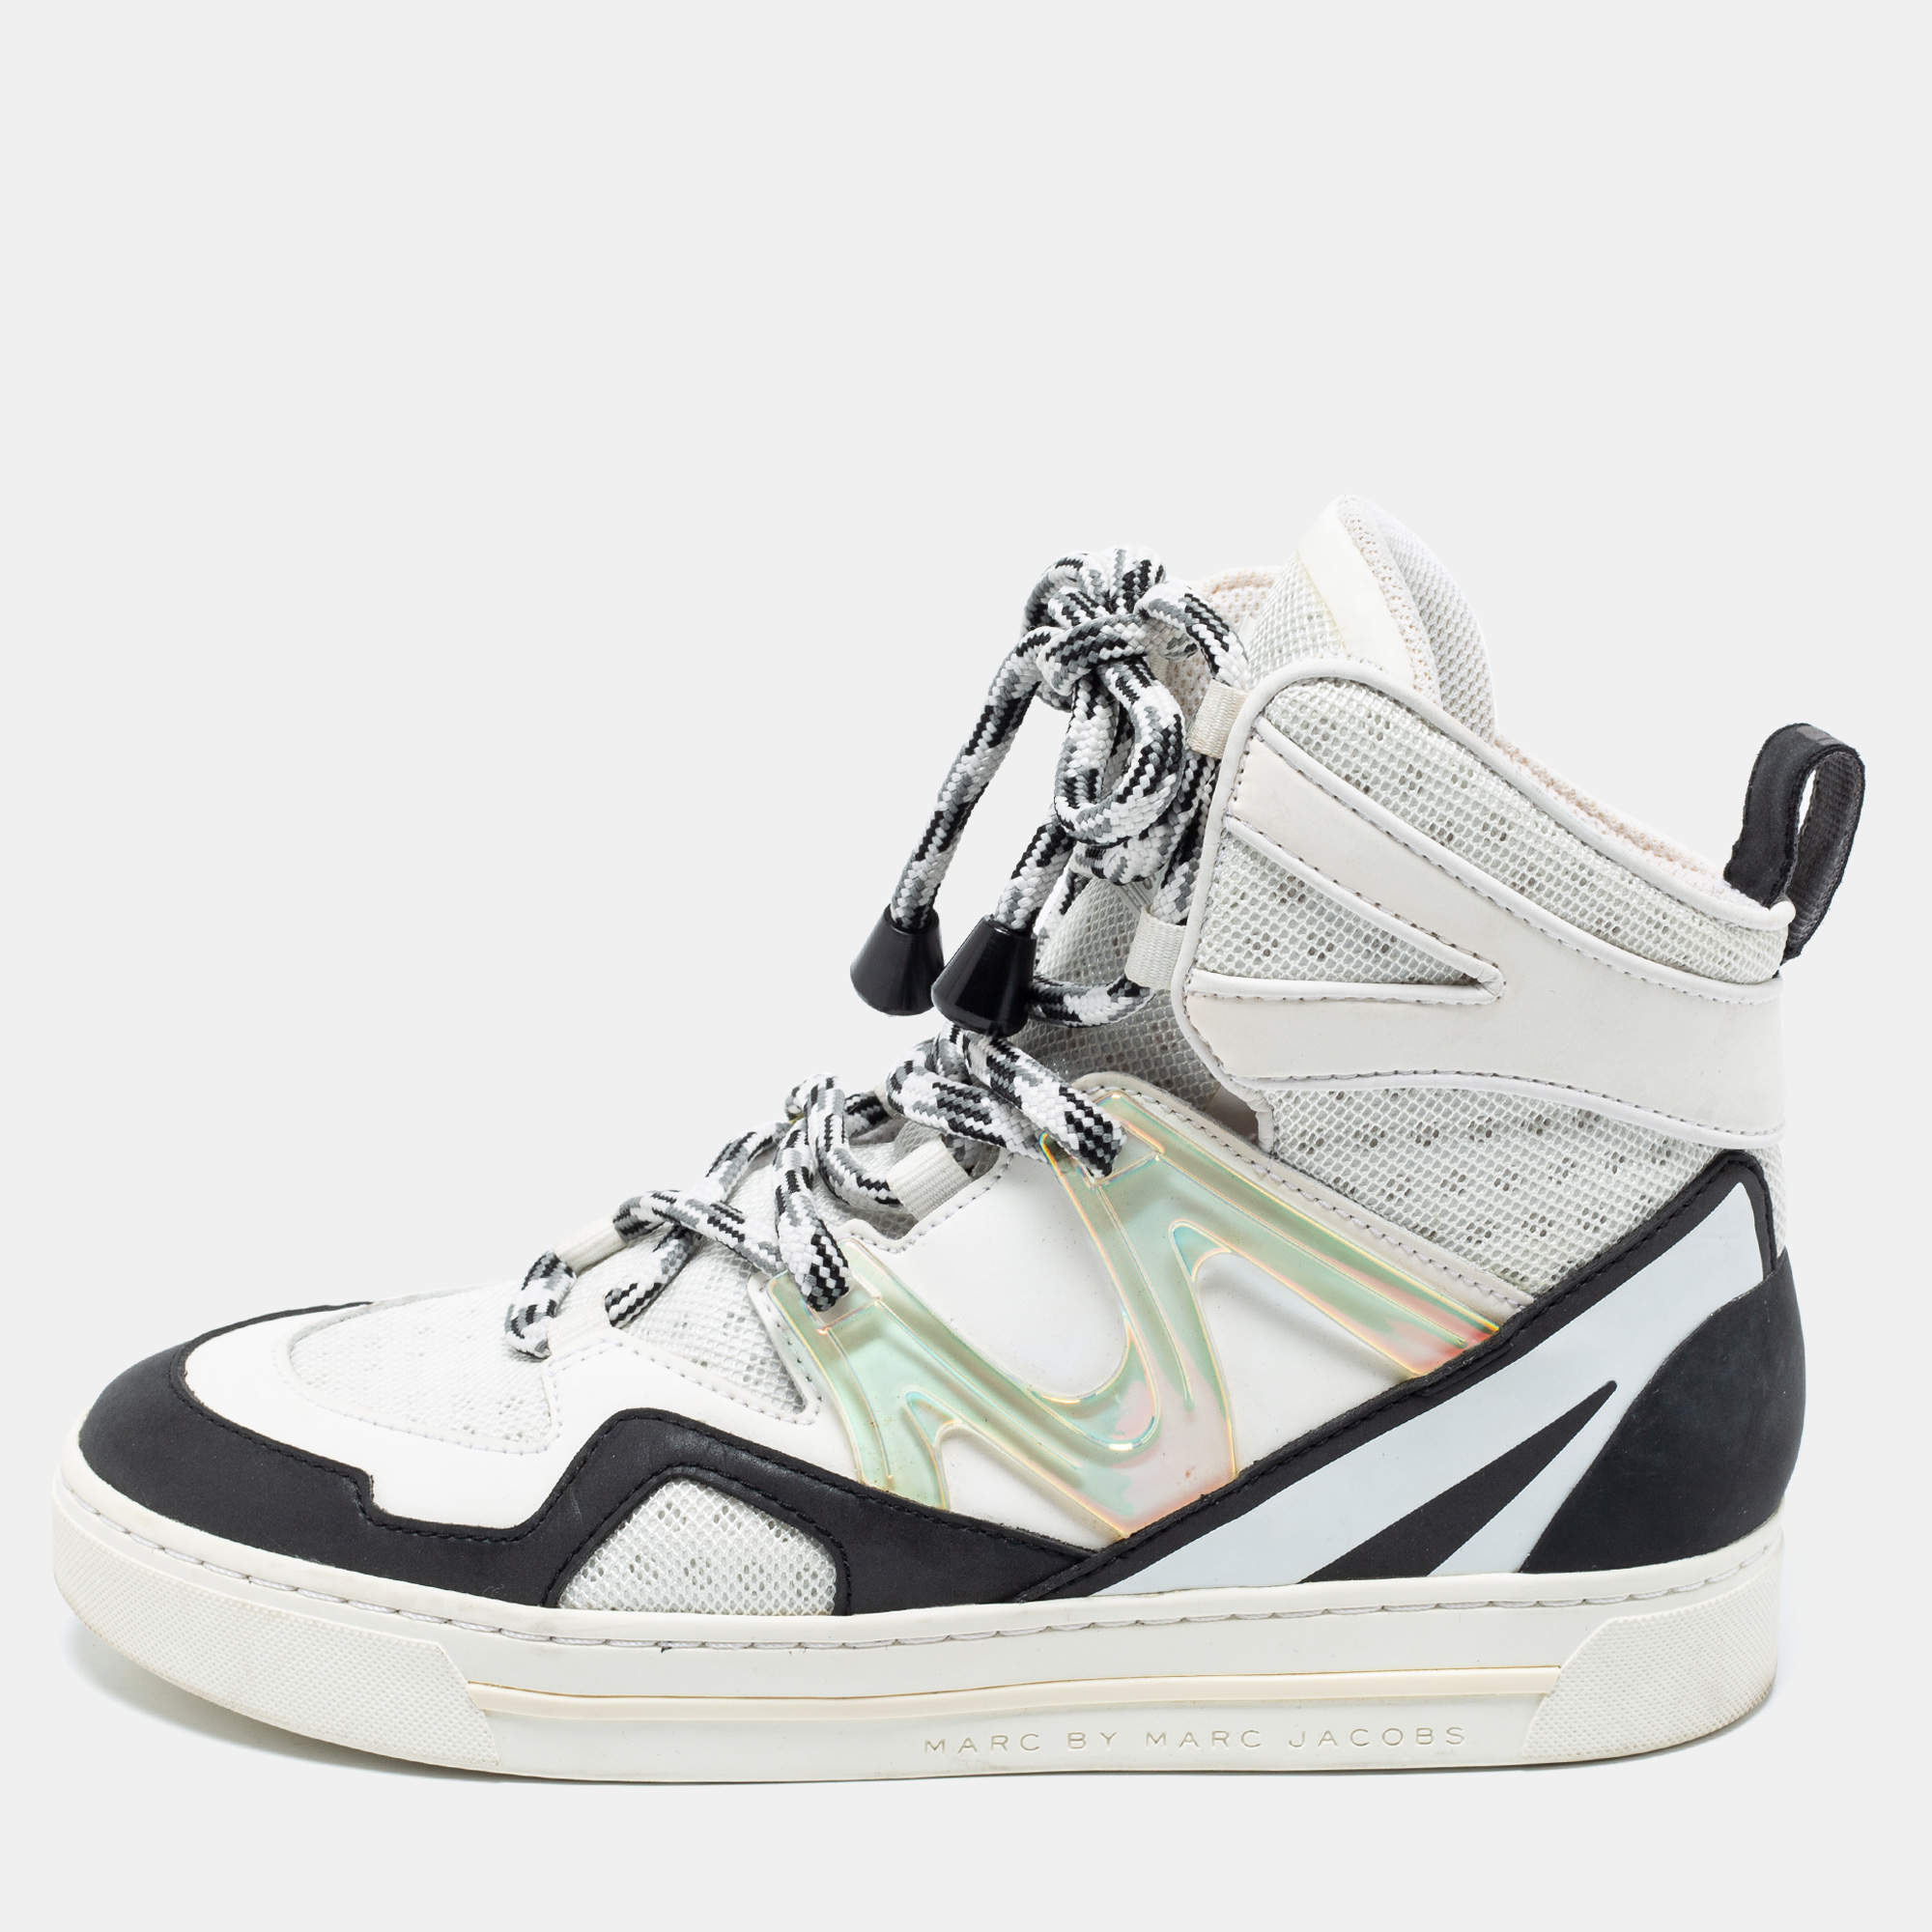 Marc Marc Jacobs Multicolor Leather And Mesh High Top Sneakers Size 36 Marc by Marc Jacobs | TLC